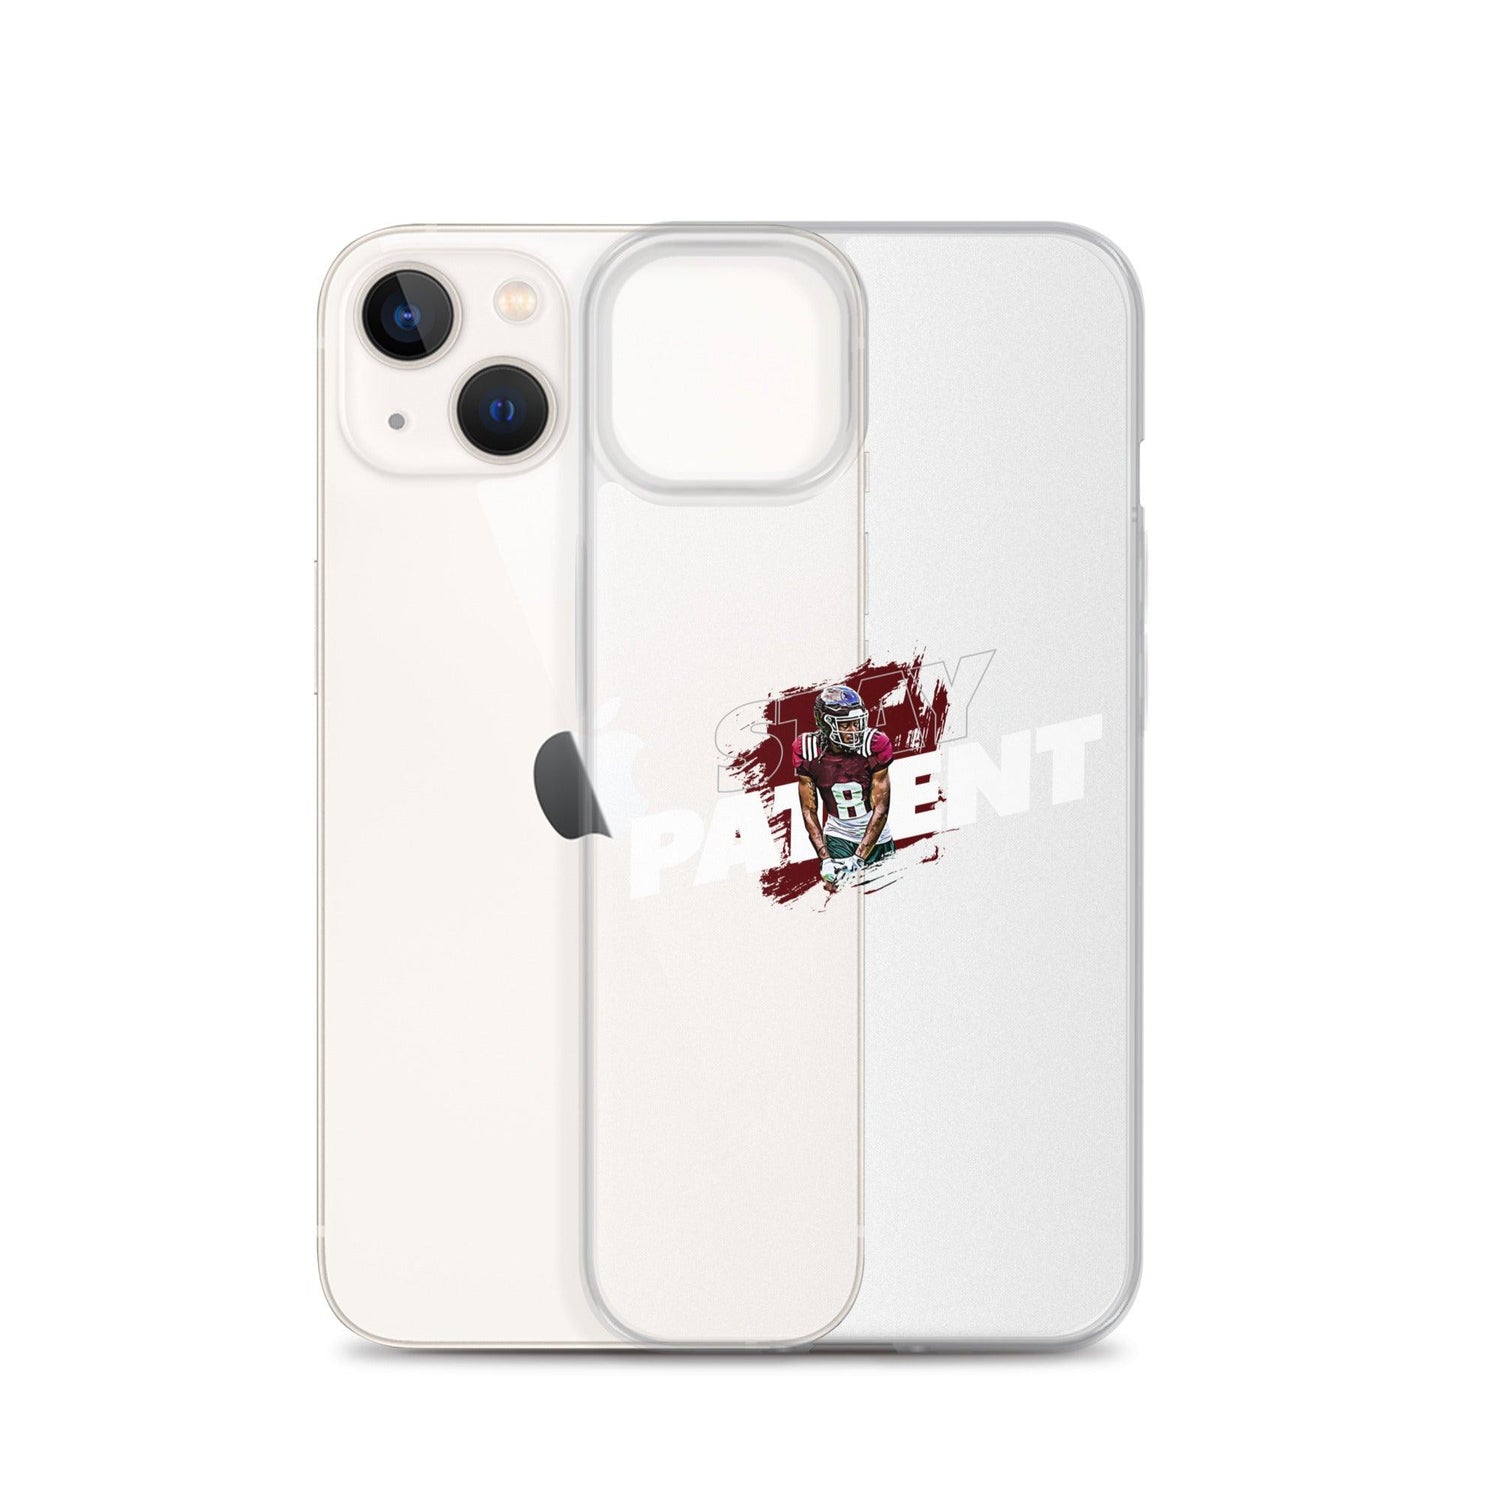 Yulkeith Brown "Stay Patient" iPhone Case - Fan Arch